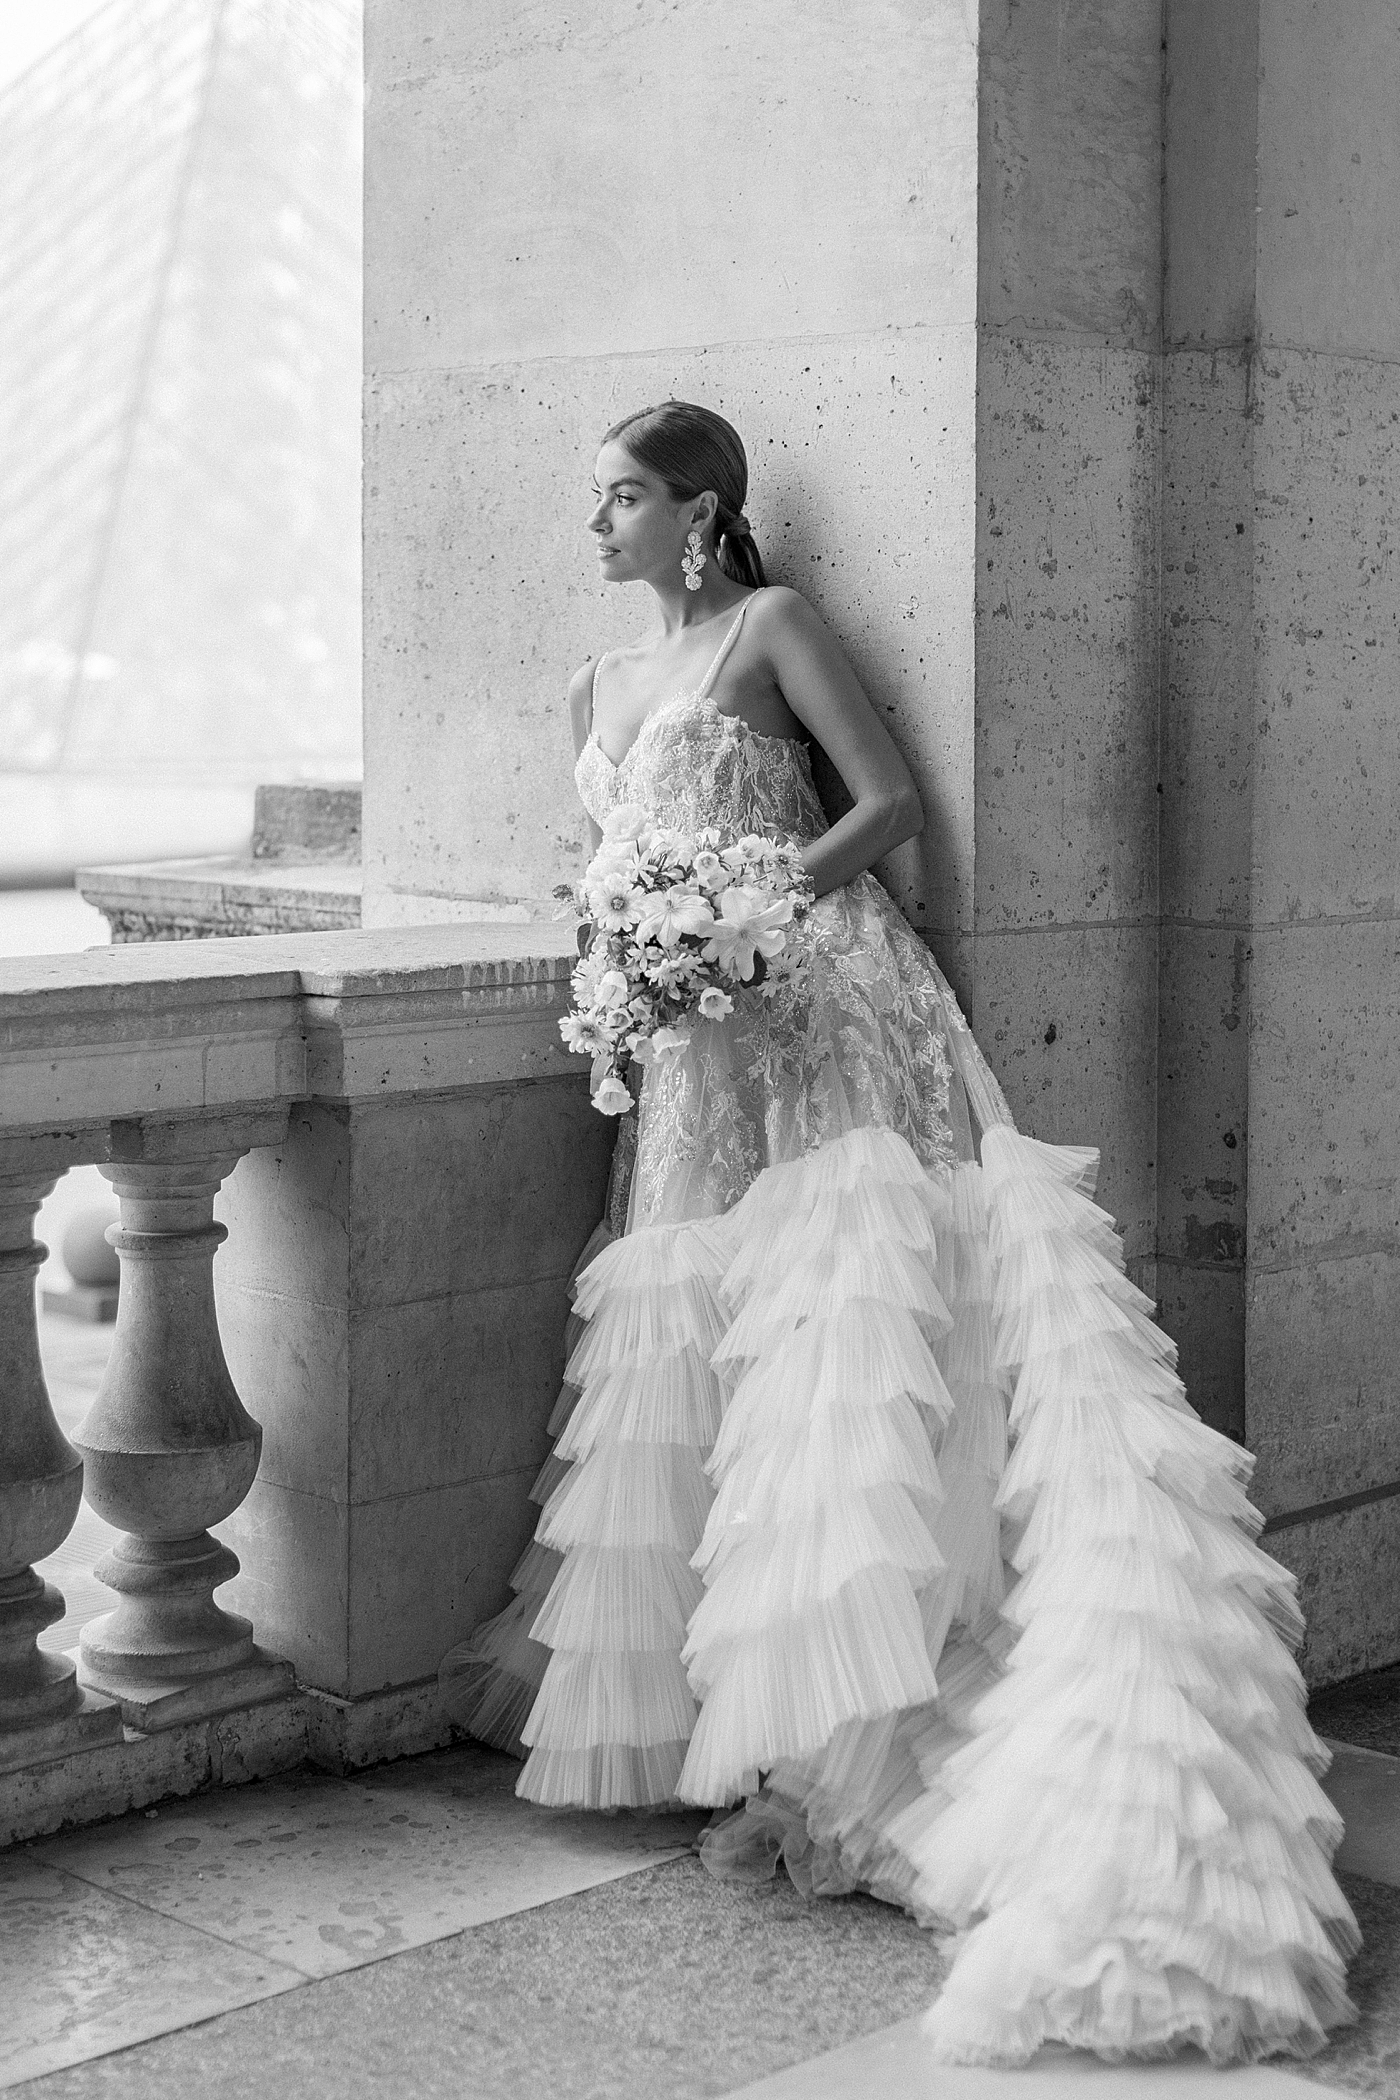 Black and white image of a bride in a wedding dress posing against a concrete pillar | Image by Hope Helmuth Photography